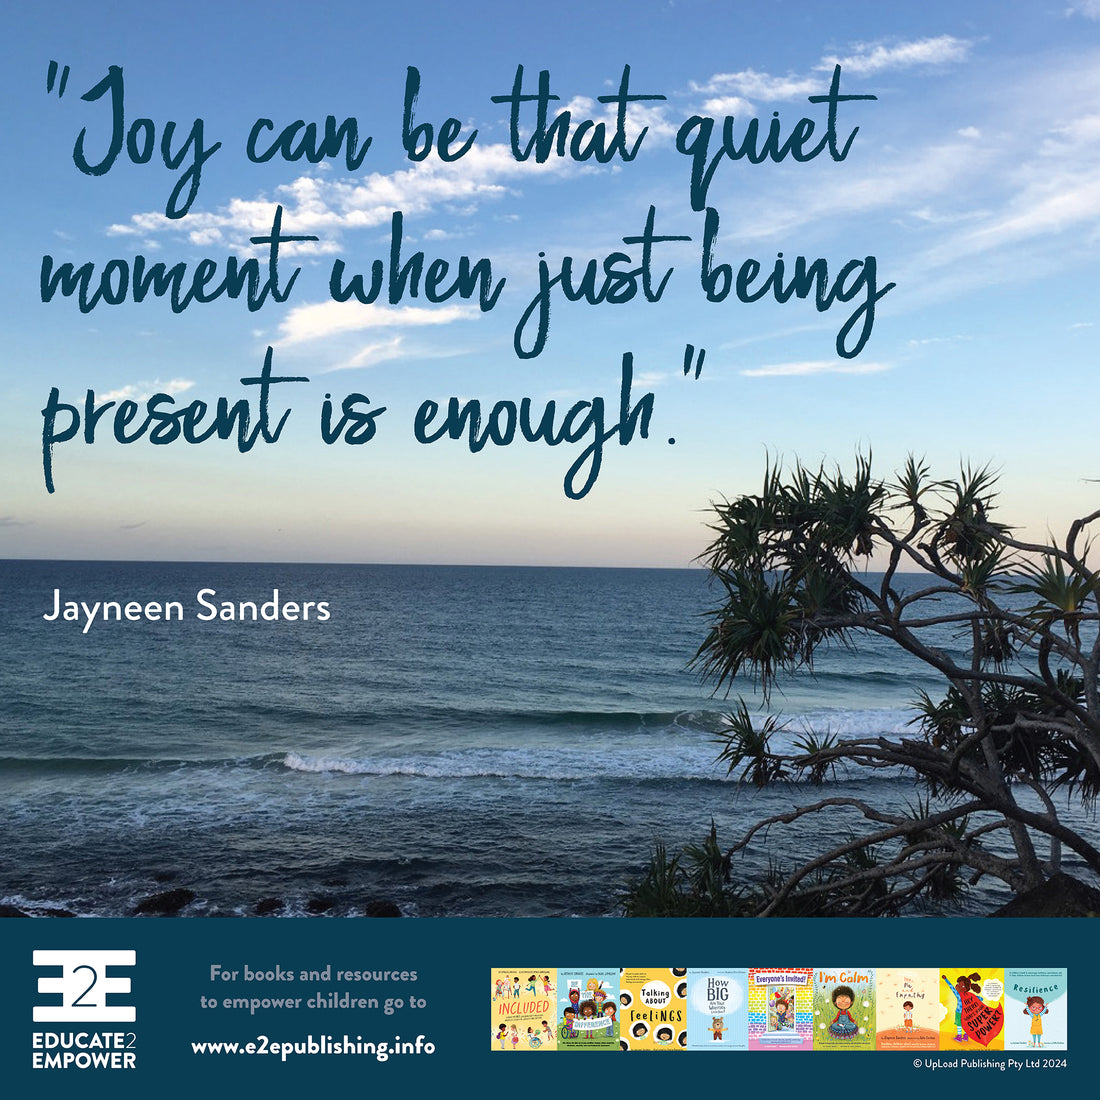 Joy can be that quiet moment when just being present is enough.